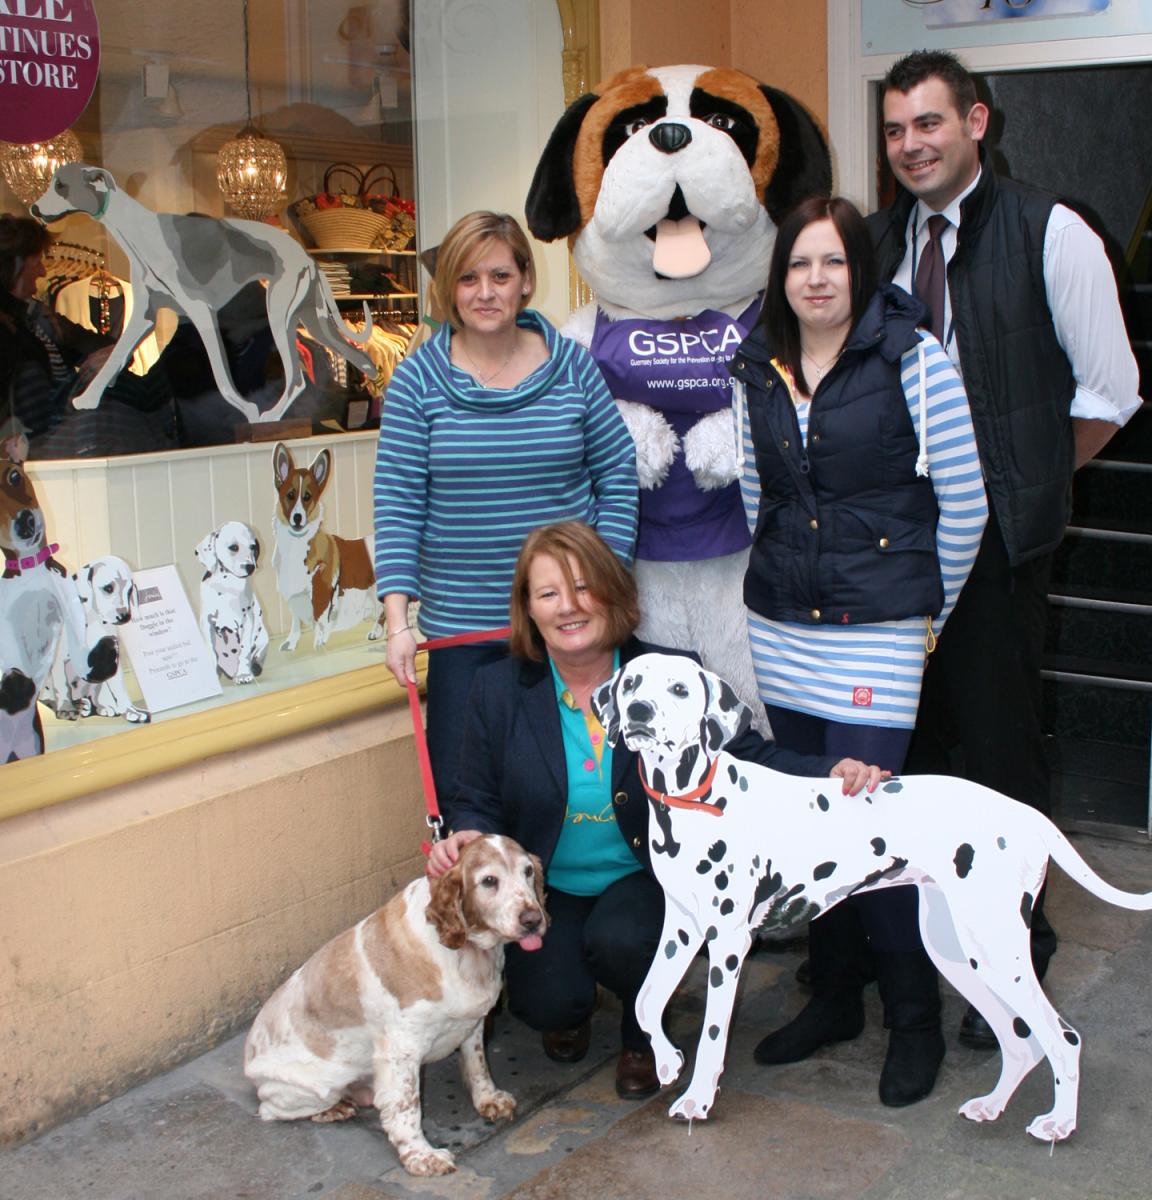 Joules Guernsey support the GSPCA